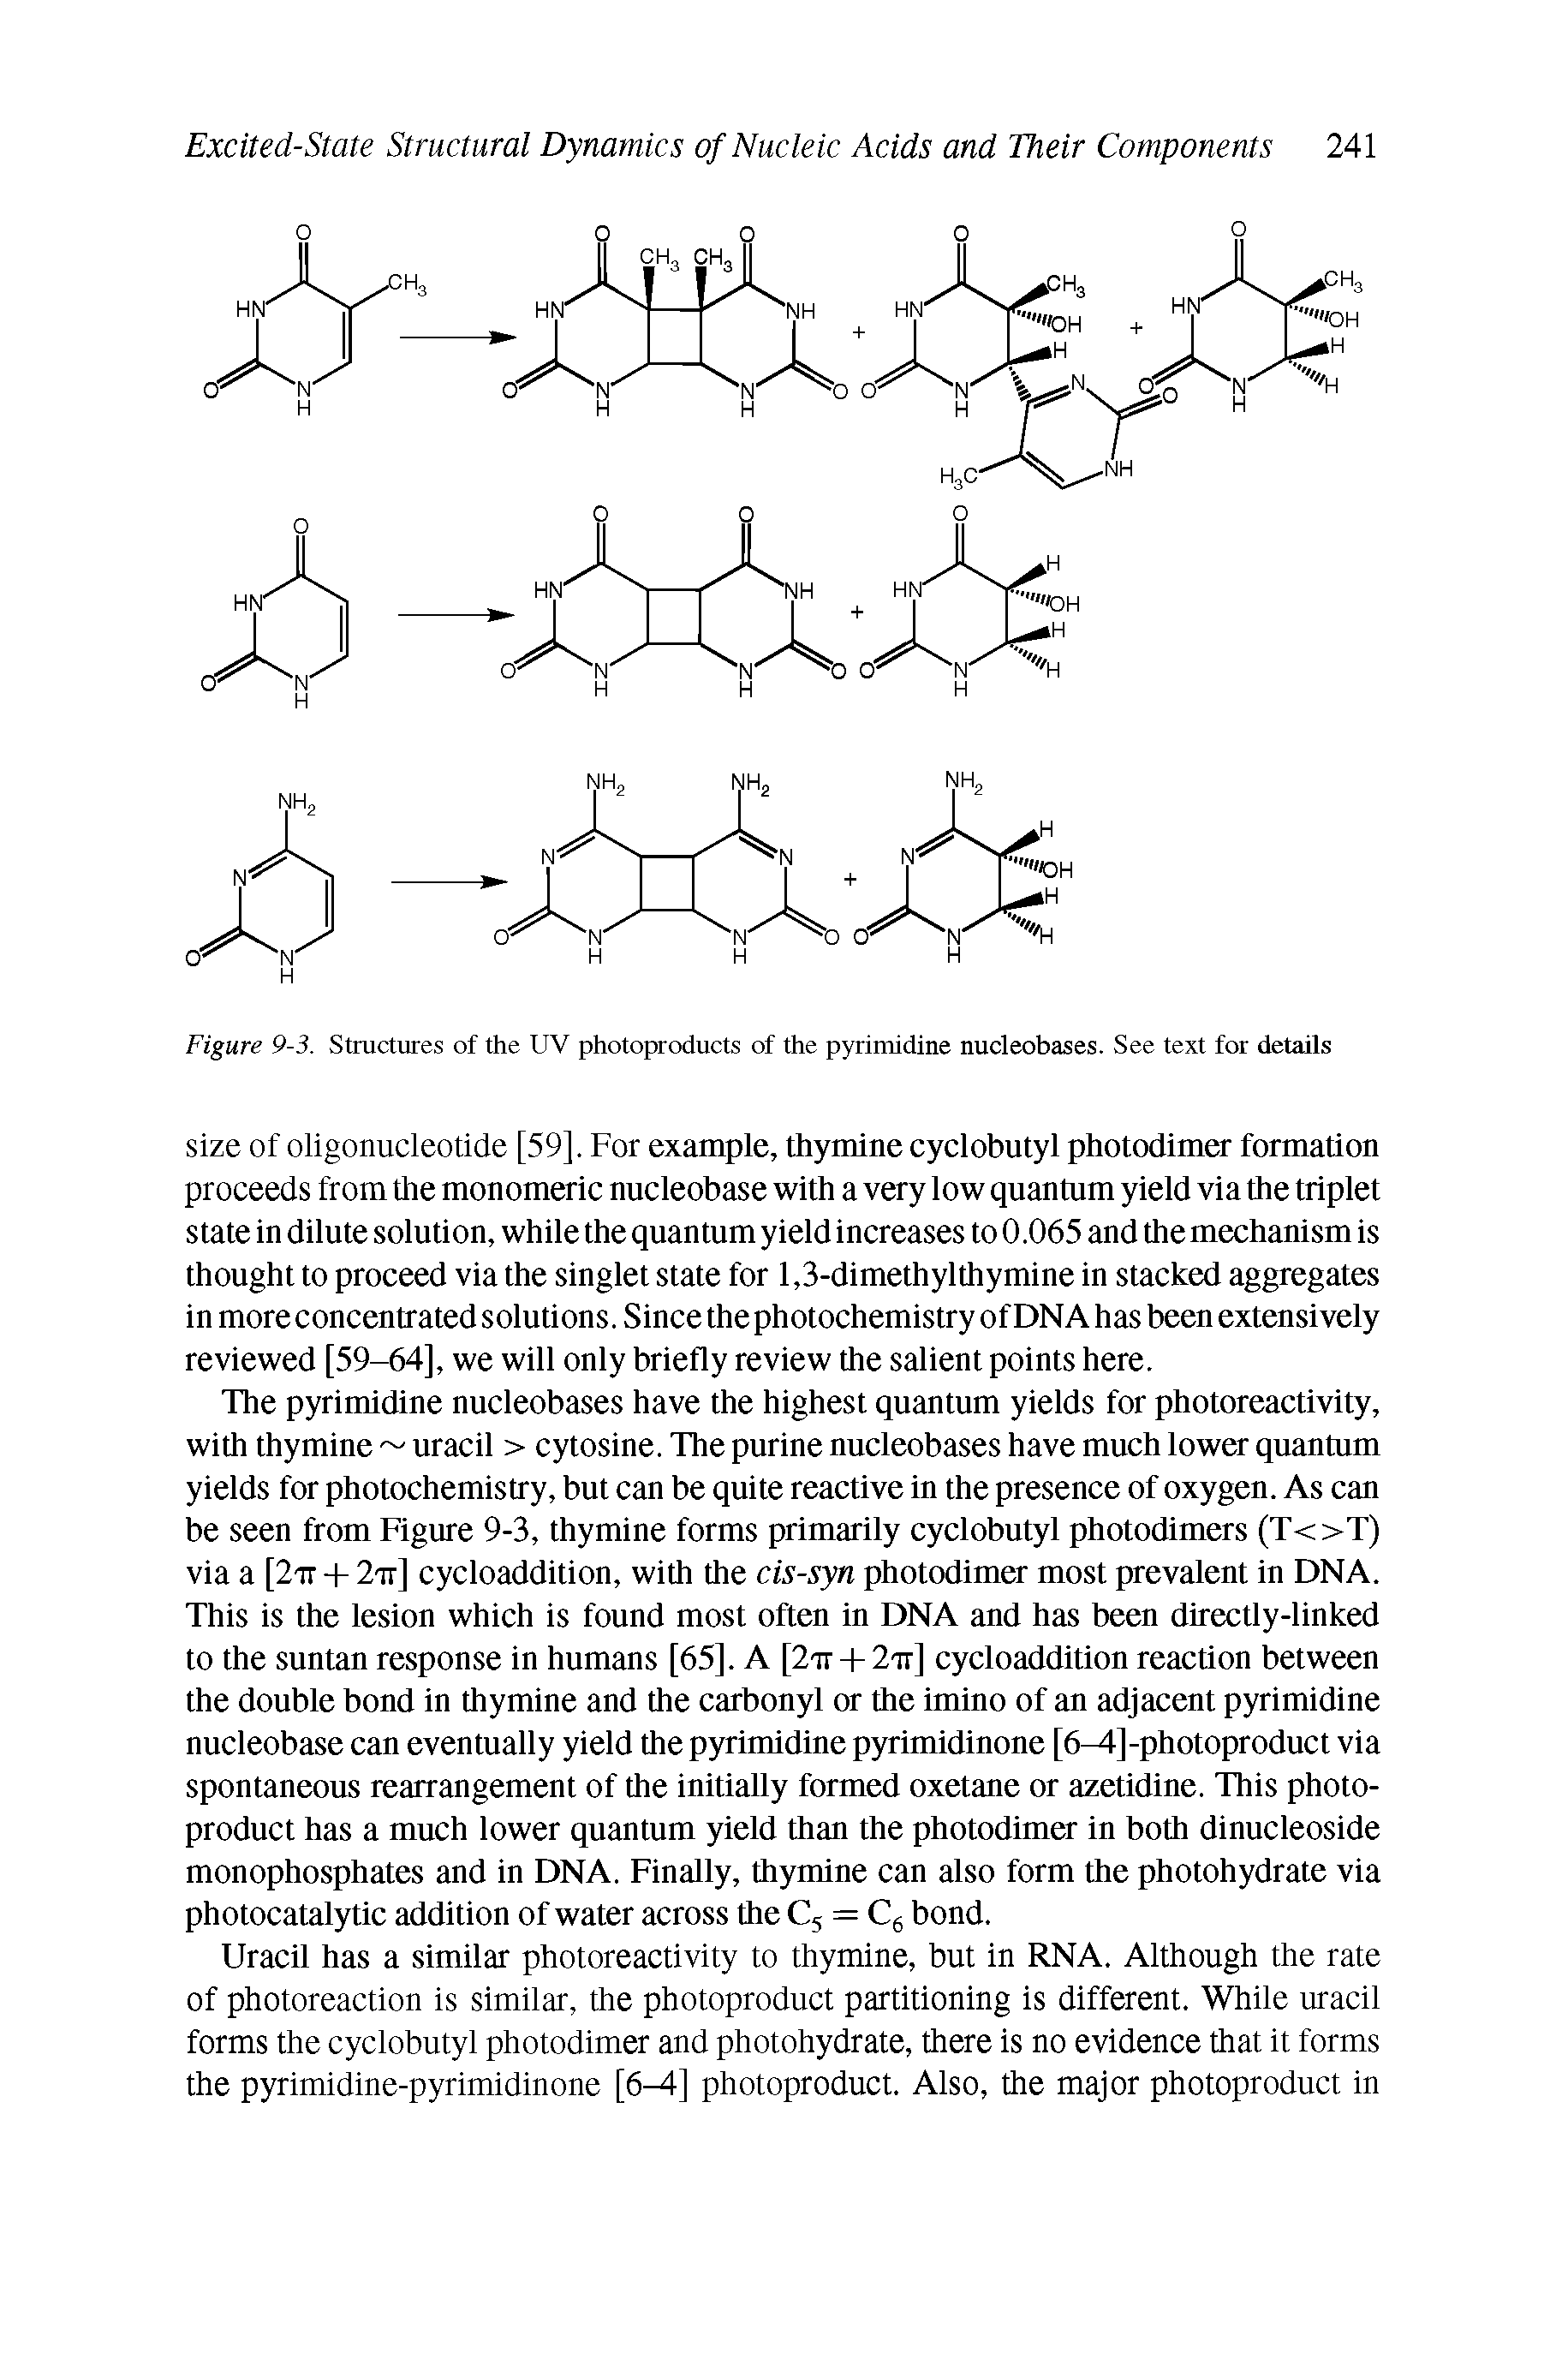 Figure 9-3. Structures of the UV photoproducts of the pyrimidine nucleobases. See text for details...